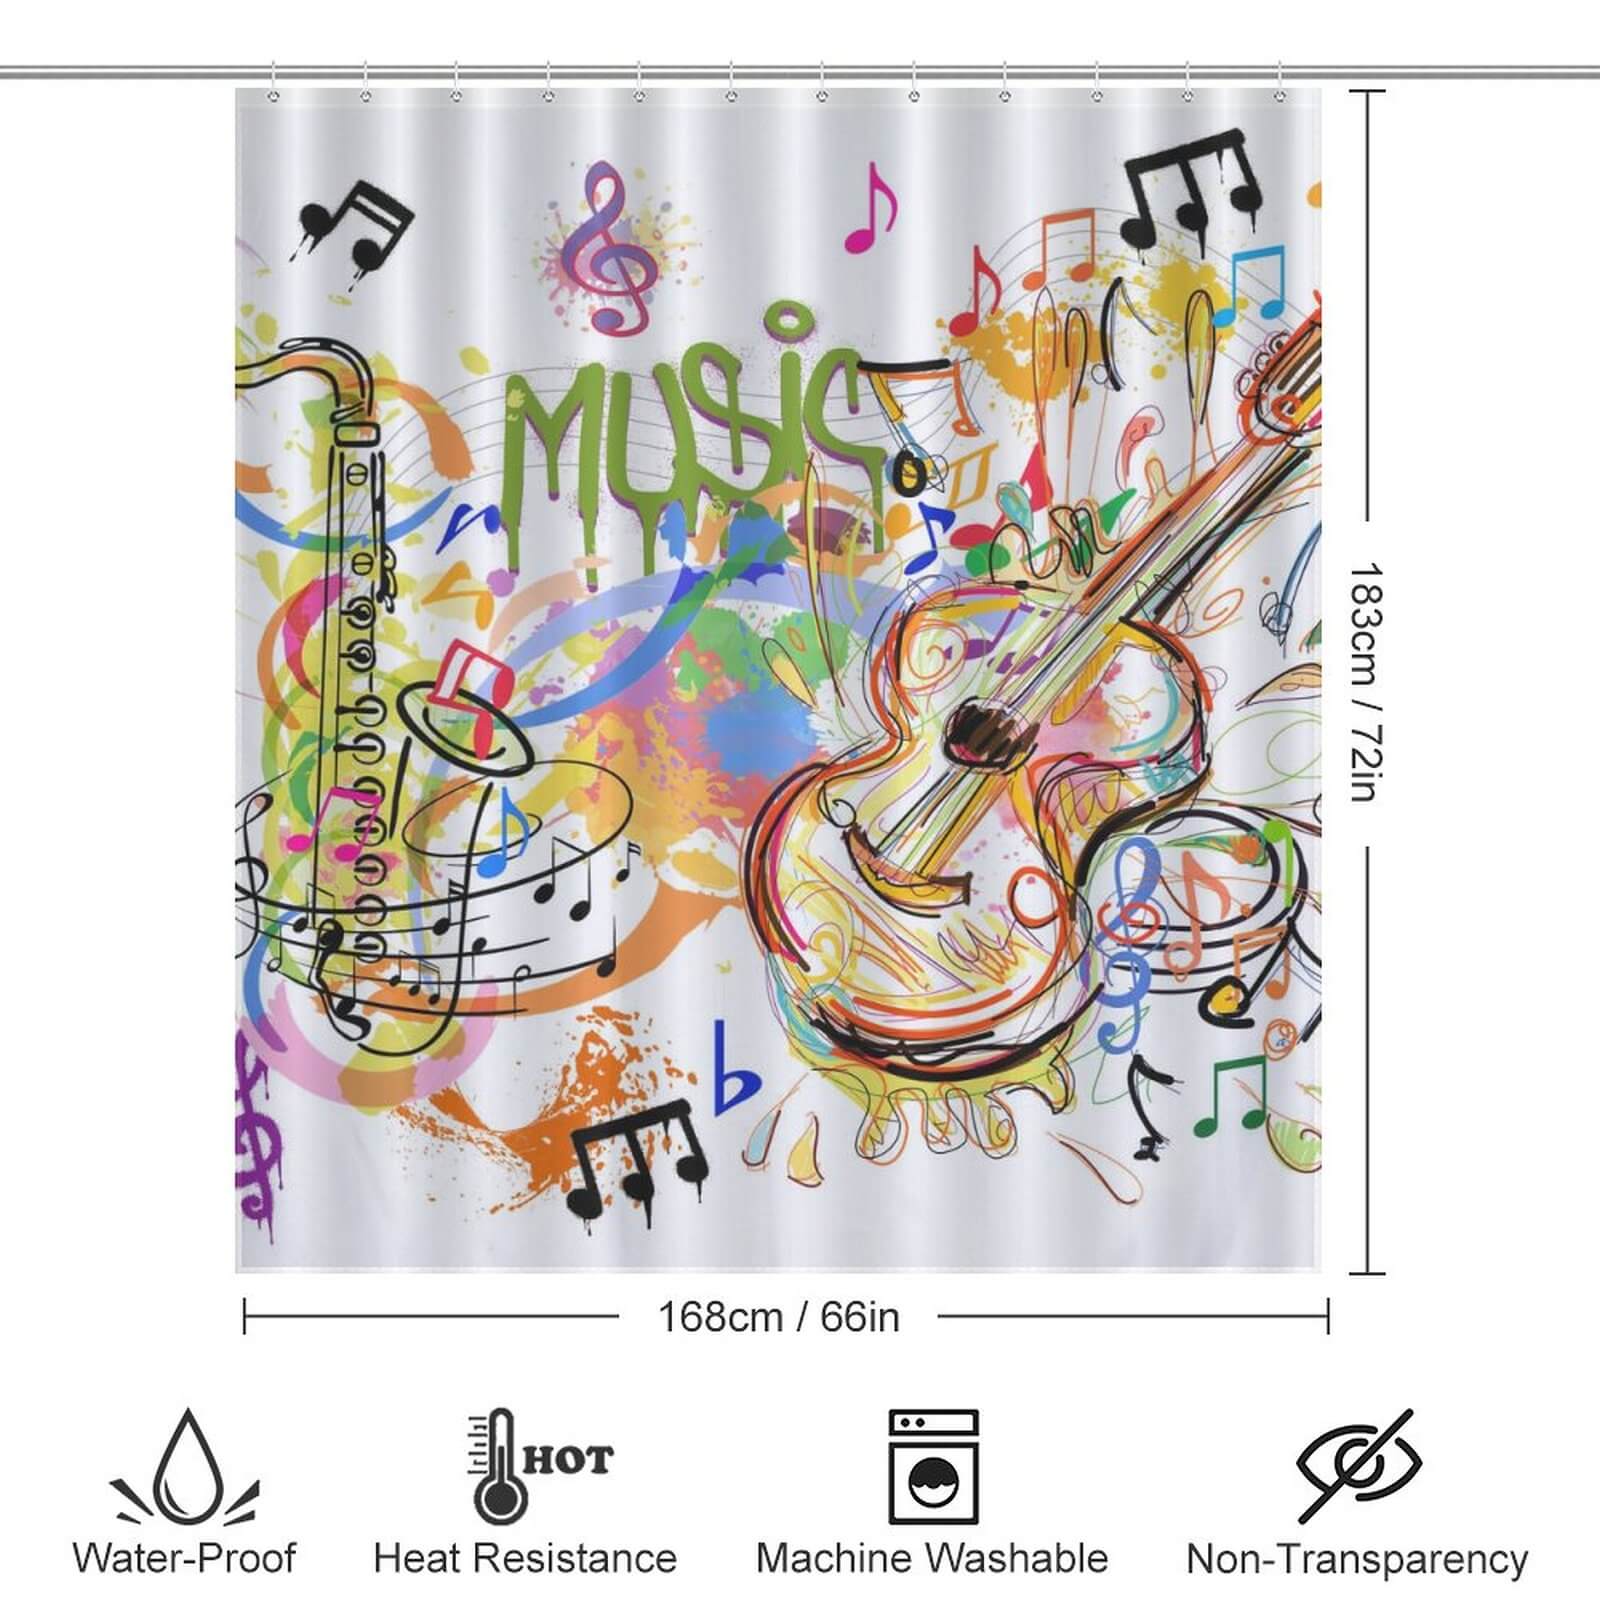 An eye-catching Graffiti Music Shower Curtain featuring graffiti-inspired music notes and a saxophone design by Cotton Cat.